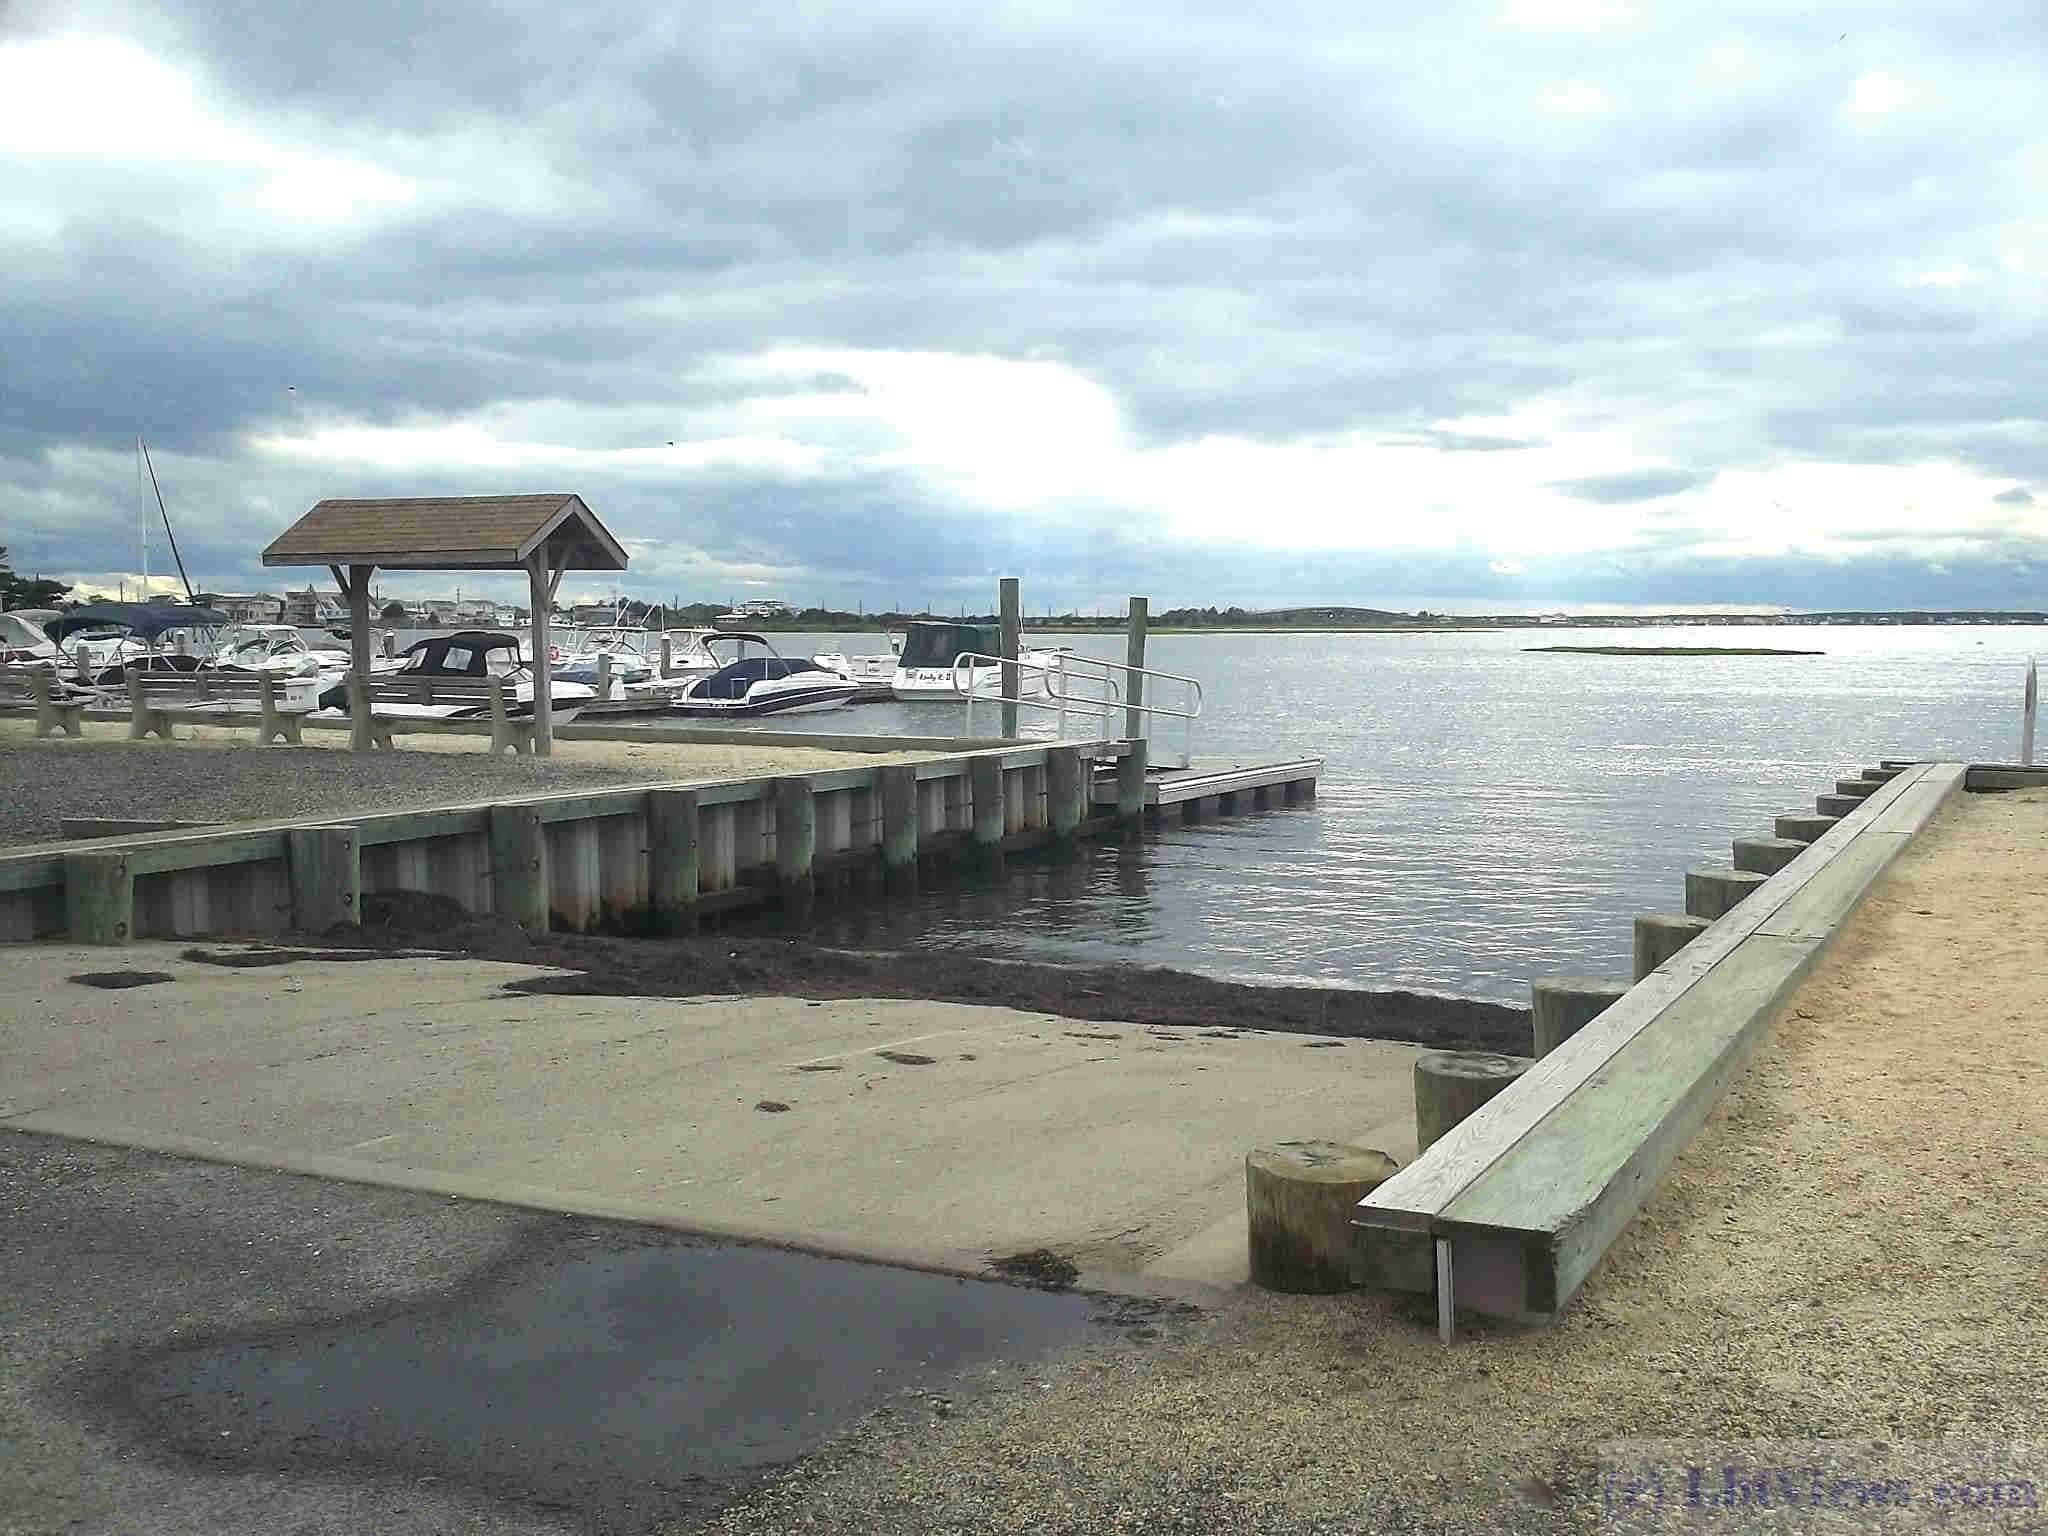 The Surf City Boat Ramp